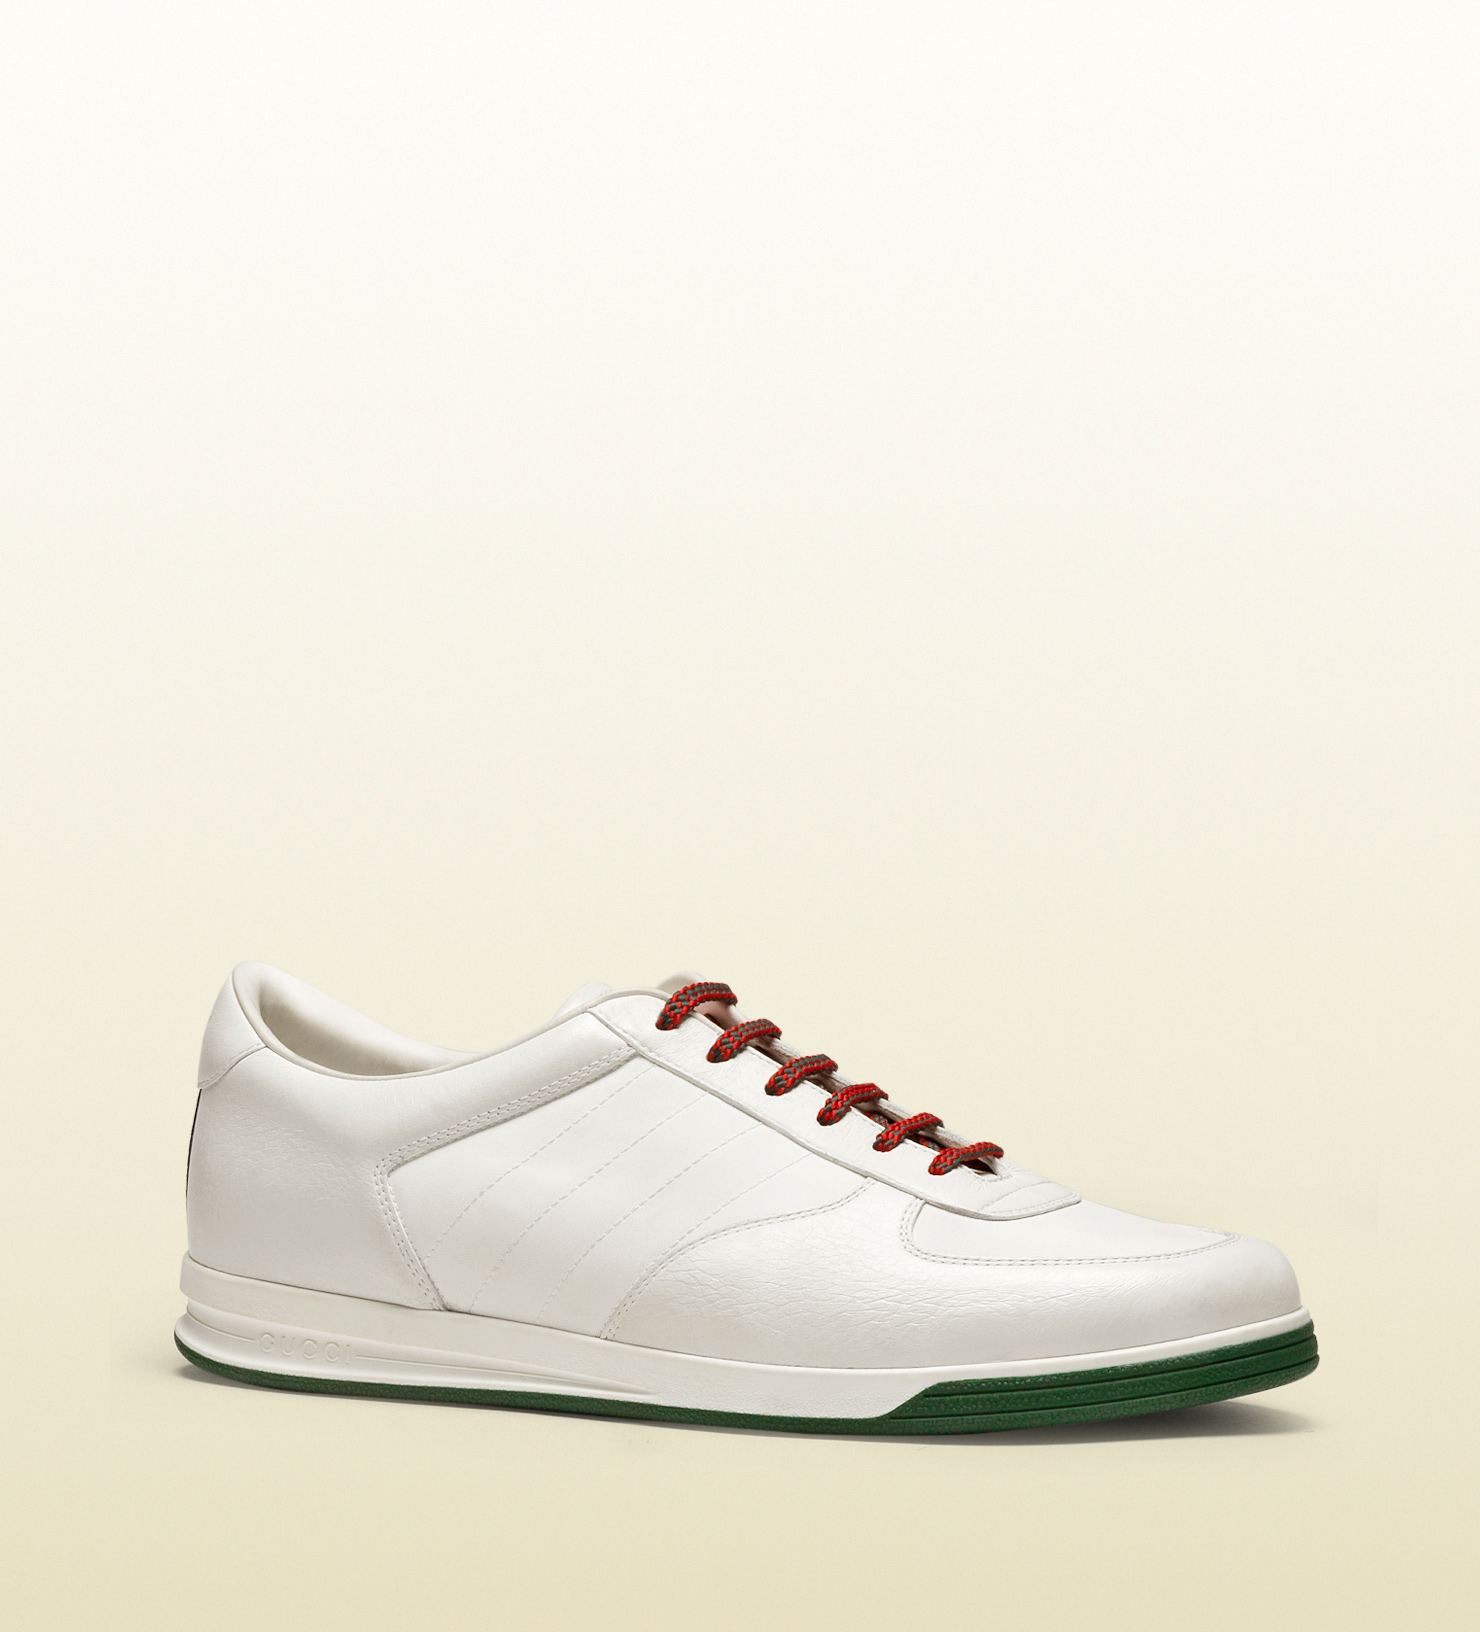 Lyst - Gucci 1984 Low Top Sneaker In Leather in White for Men